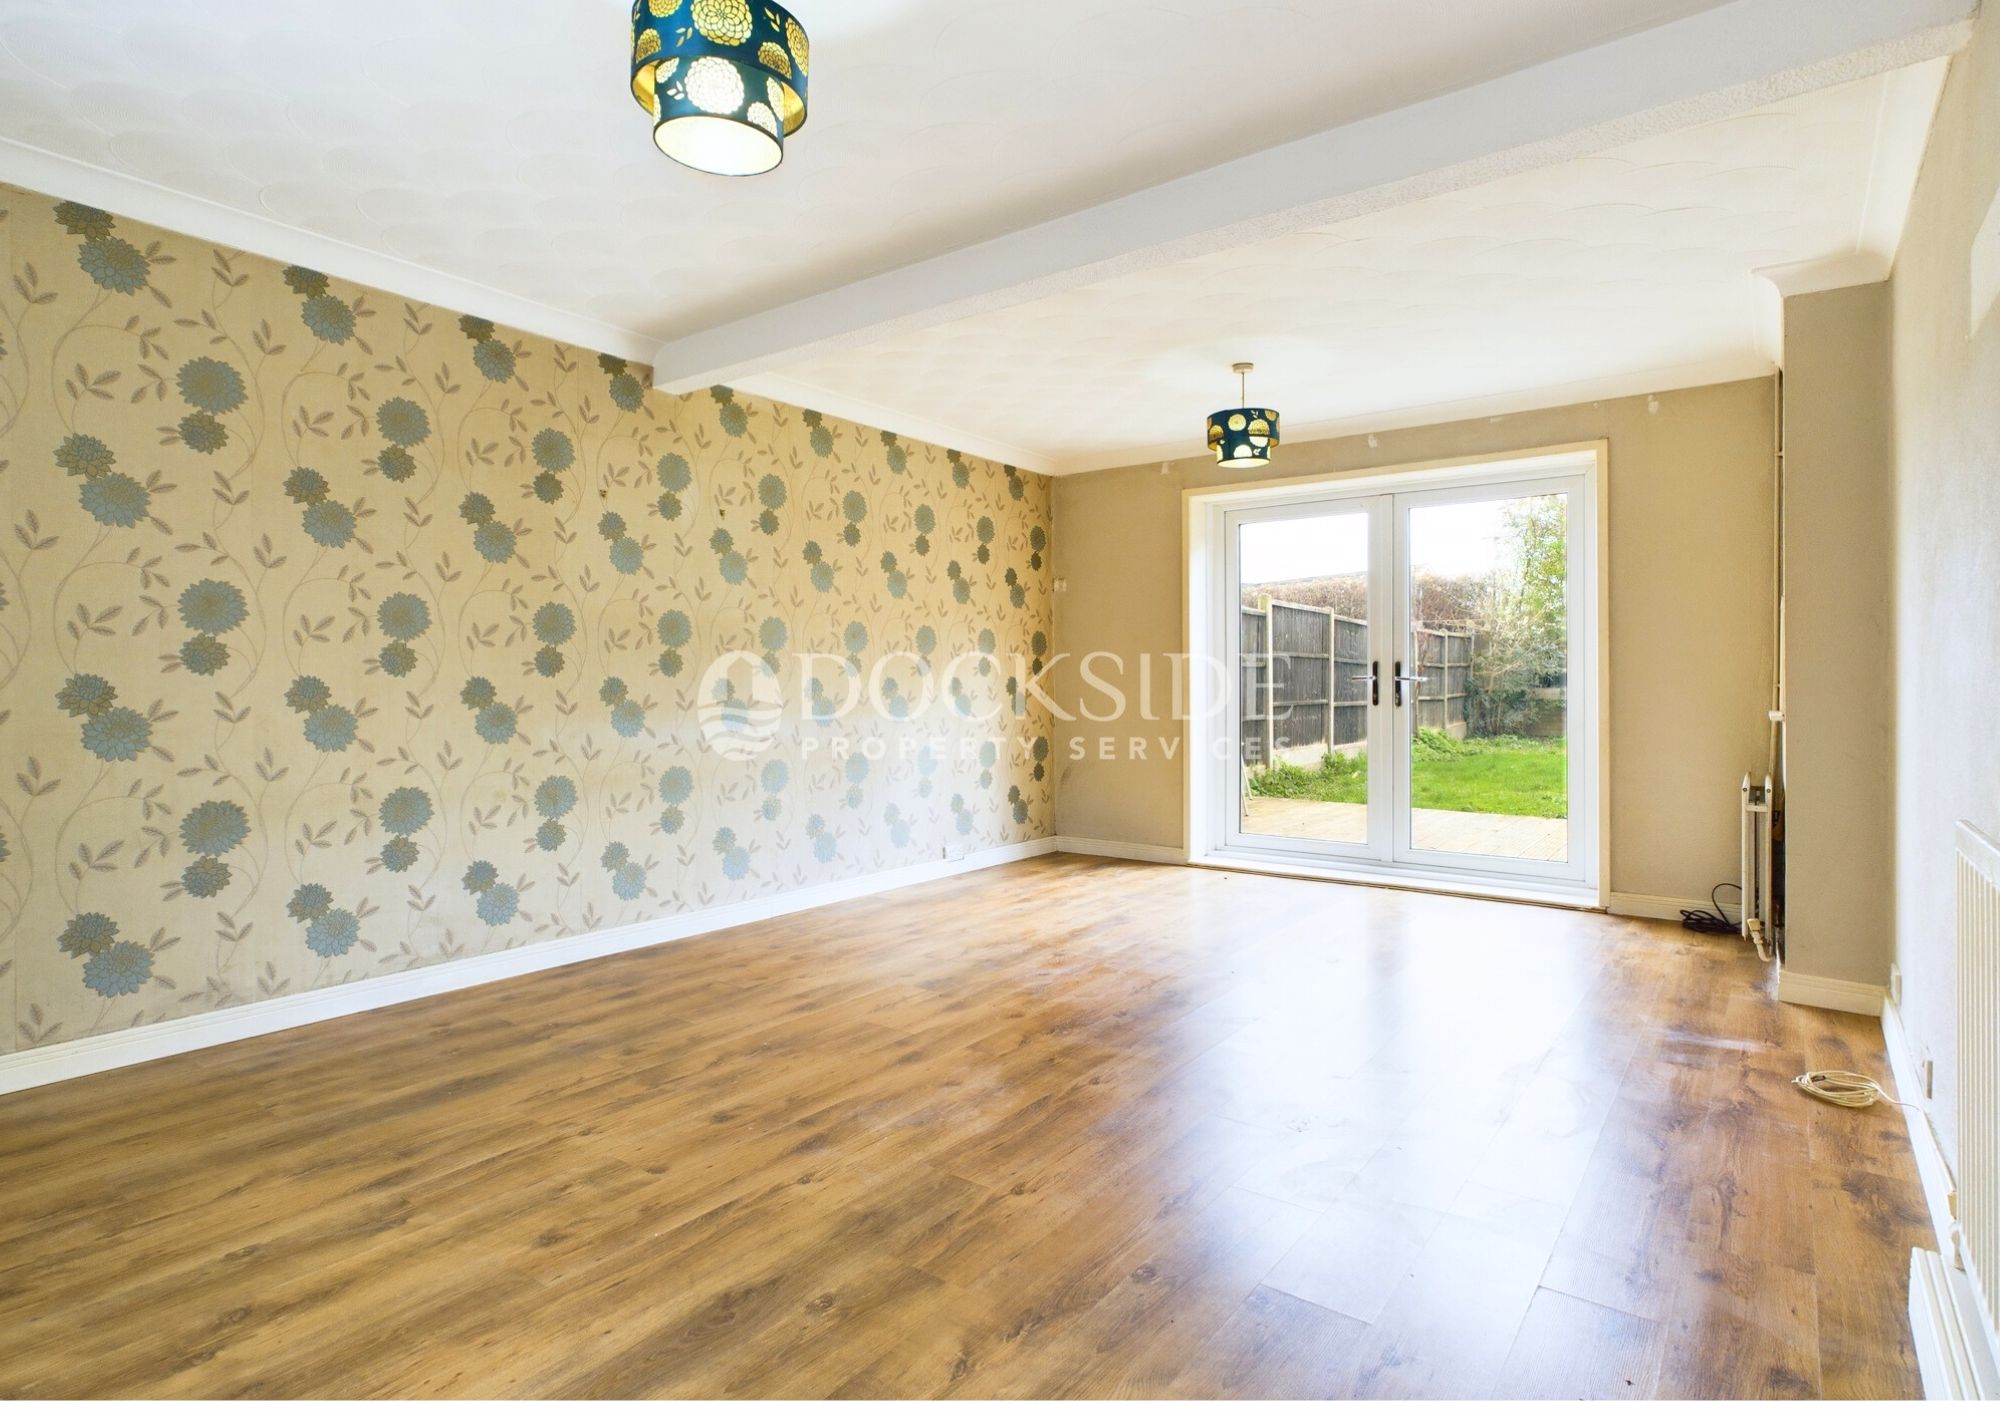 3 bed house to rent in Sycamore Road, Rochester - Property Image 1